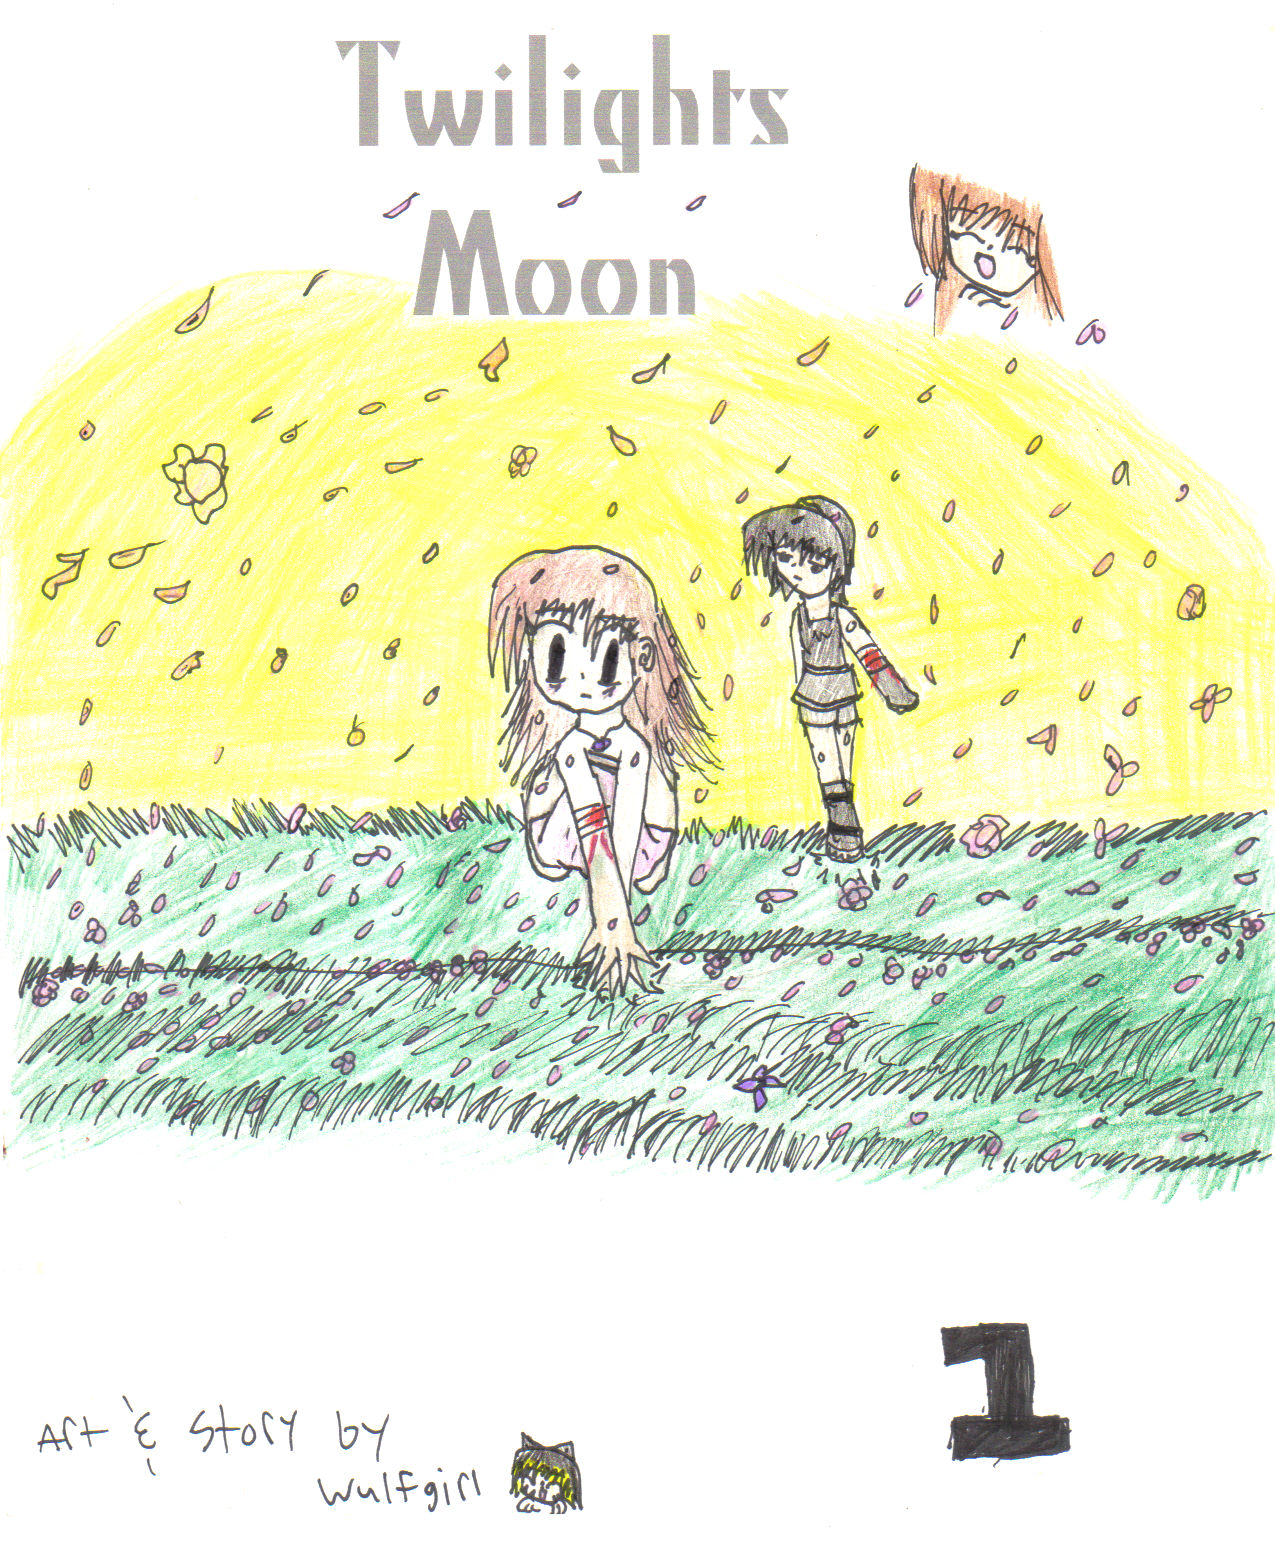 Twilights Moon Volume 1 front cover by Wulfgirl1